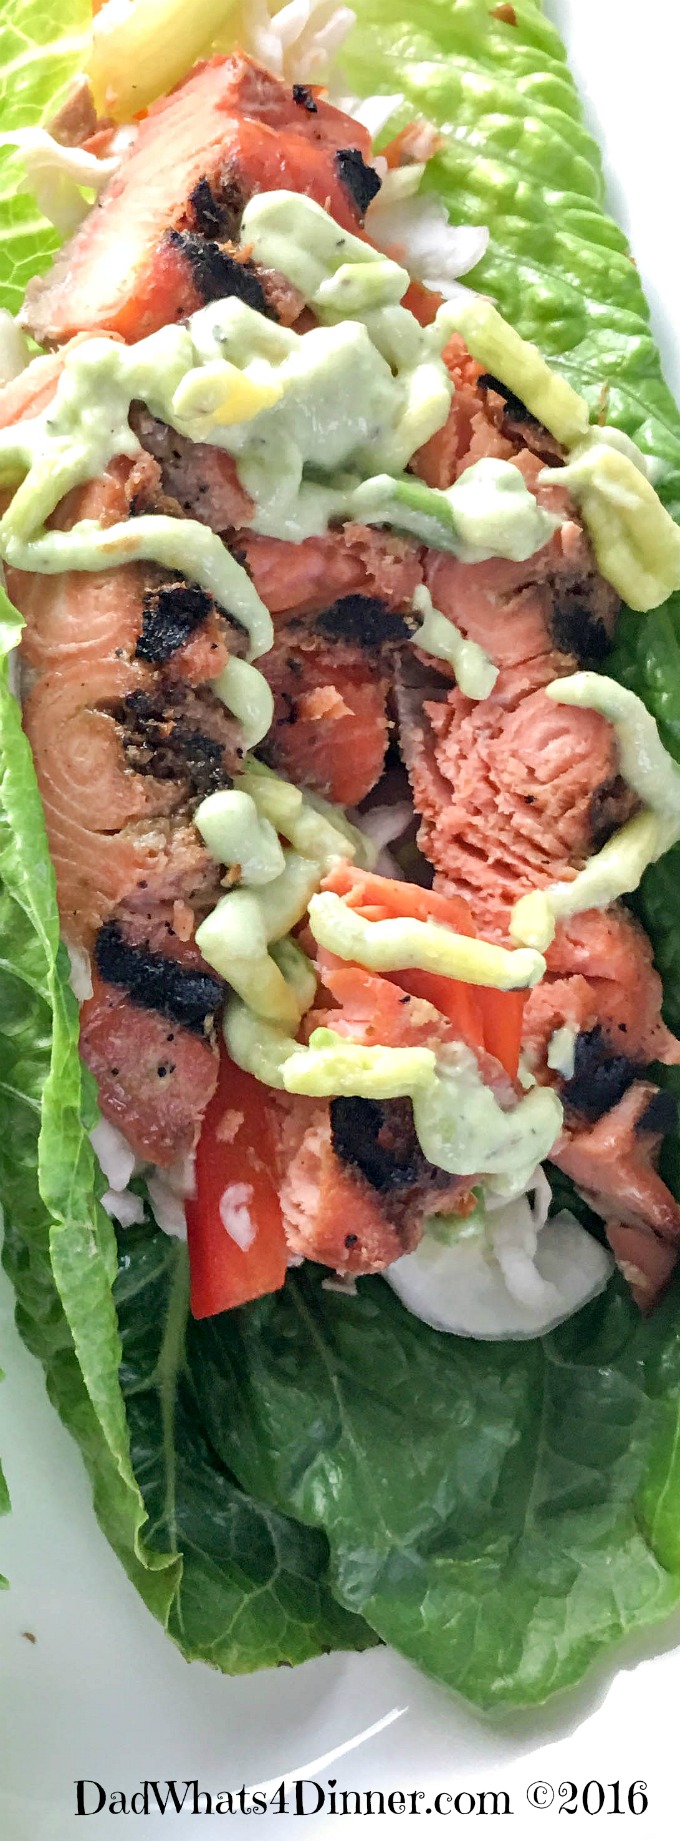 Getting Healthy with my Grilled Salmon Lettuce Wraps, exercise and Sundown Natural's Gummies!